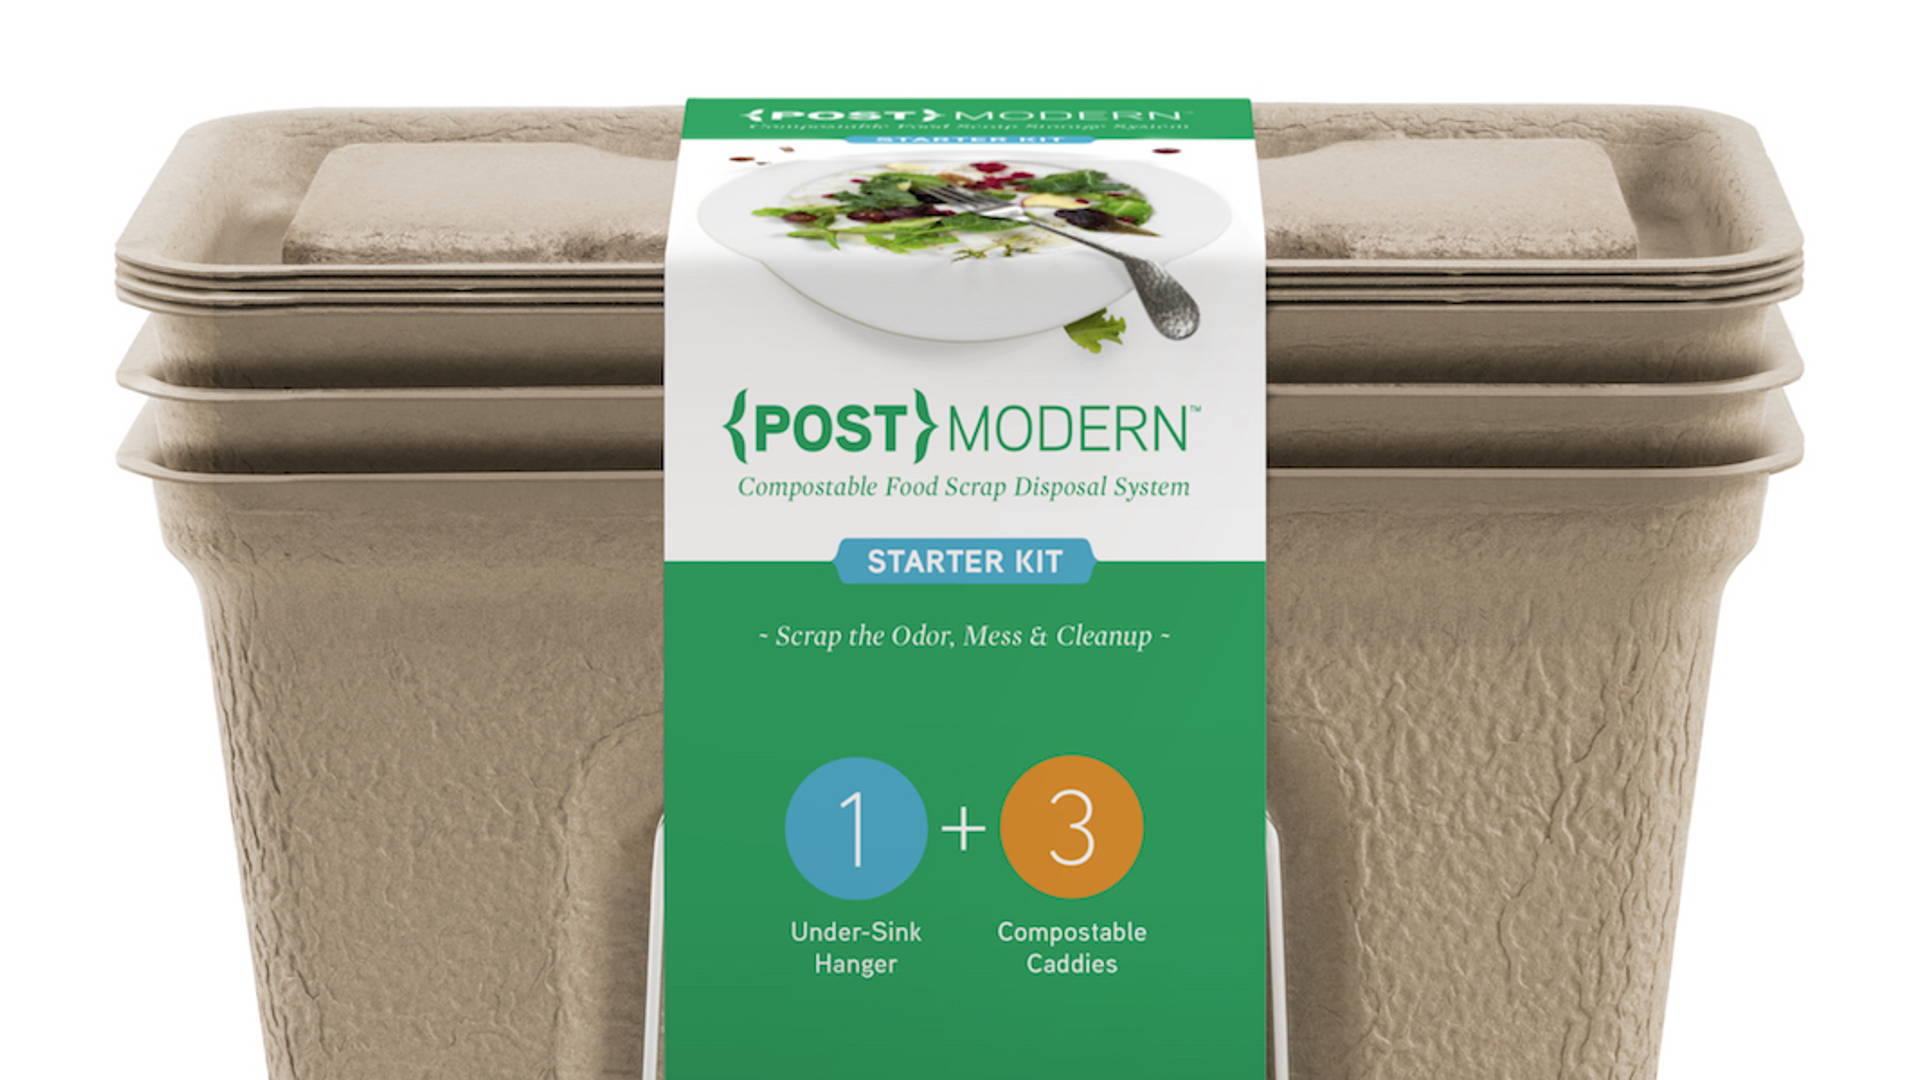 Featured image for {POST}MODERN Compostable Compost Bin